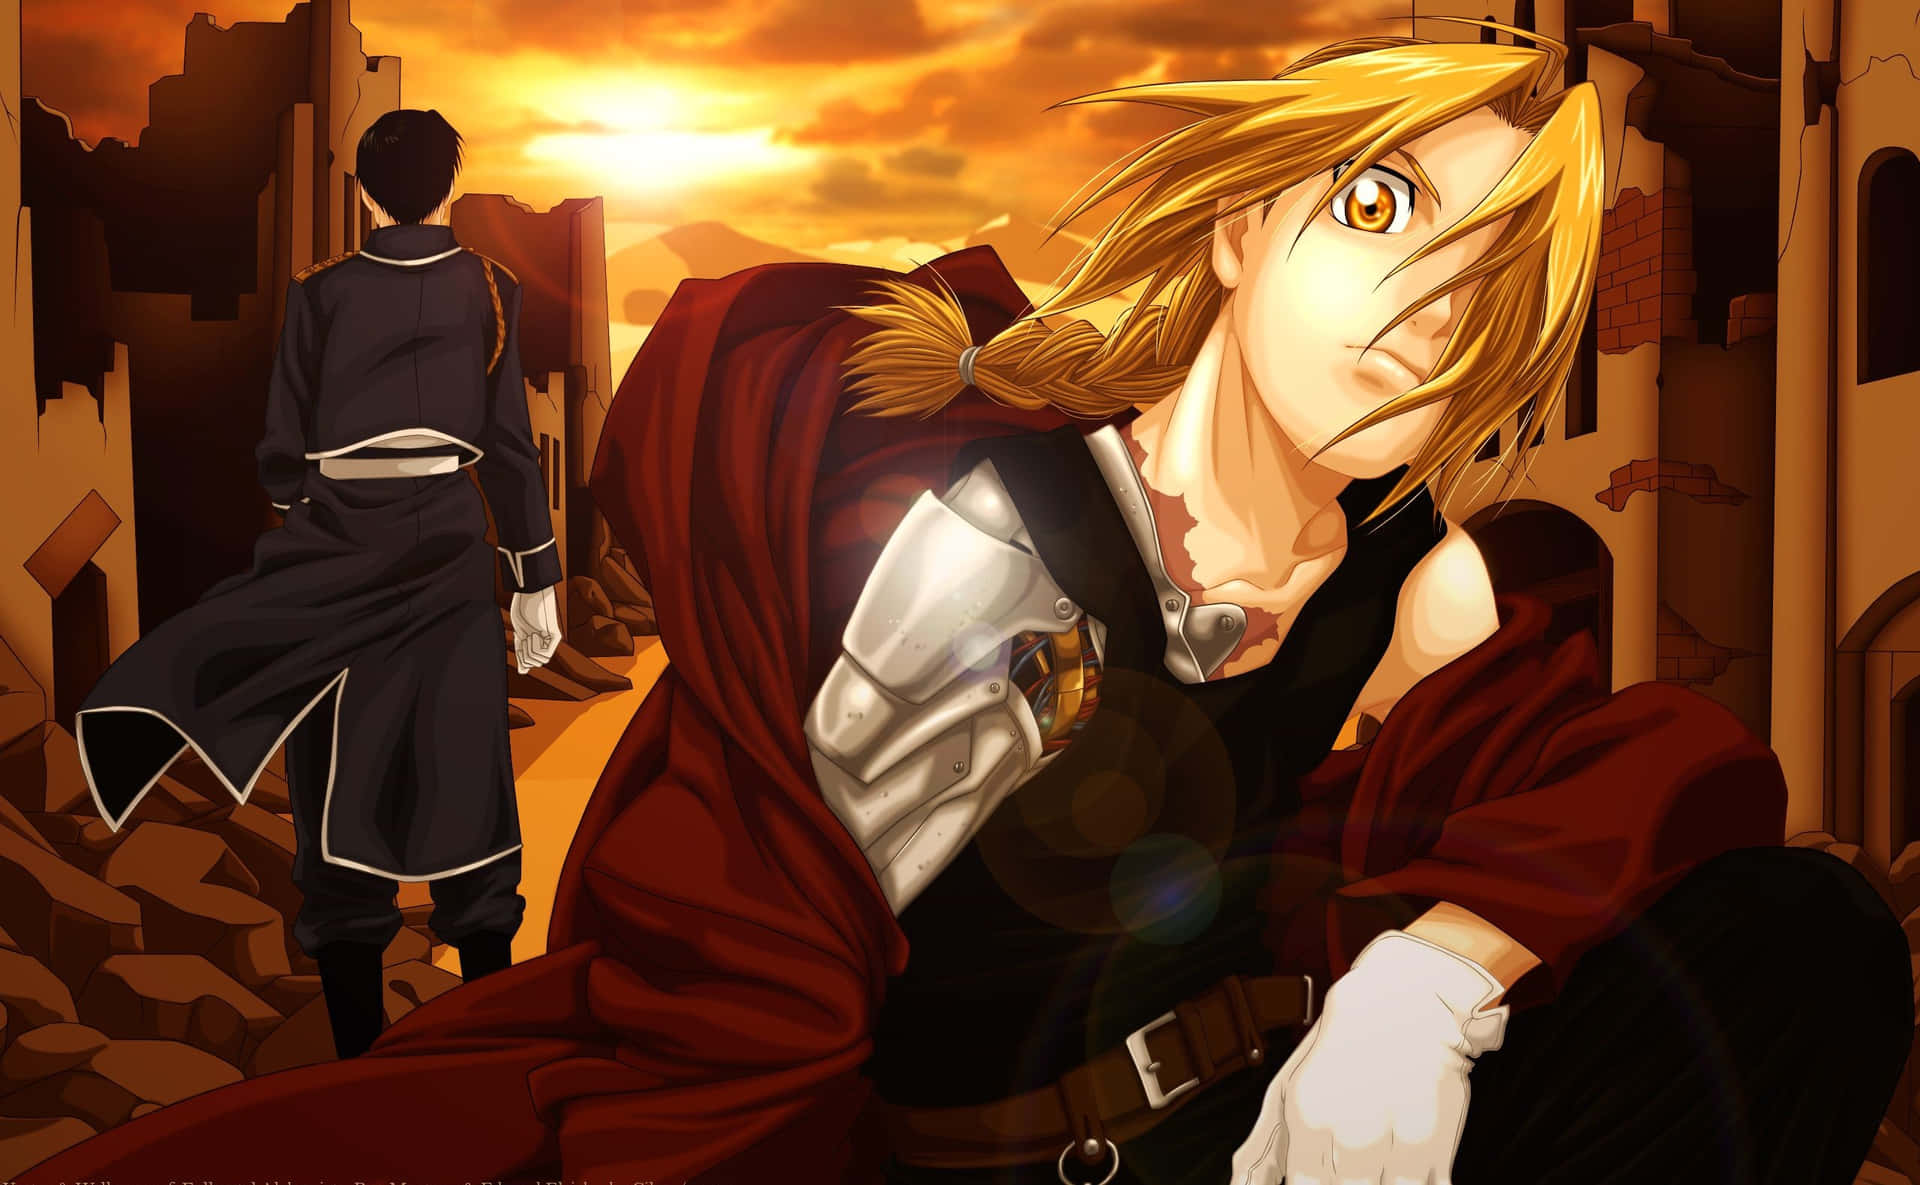 Edward Elric - A Masterful Alchemist In Action